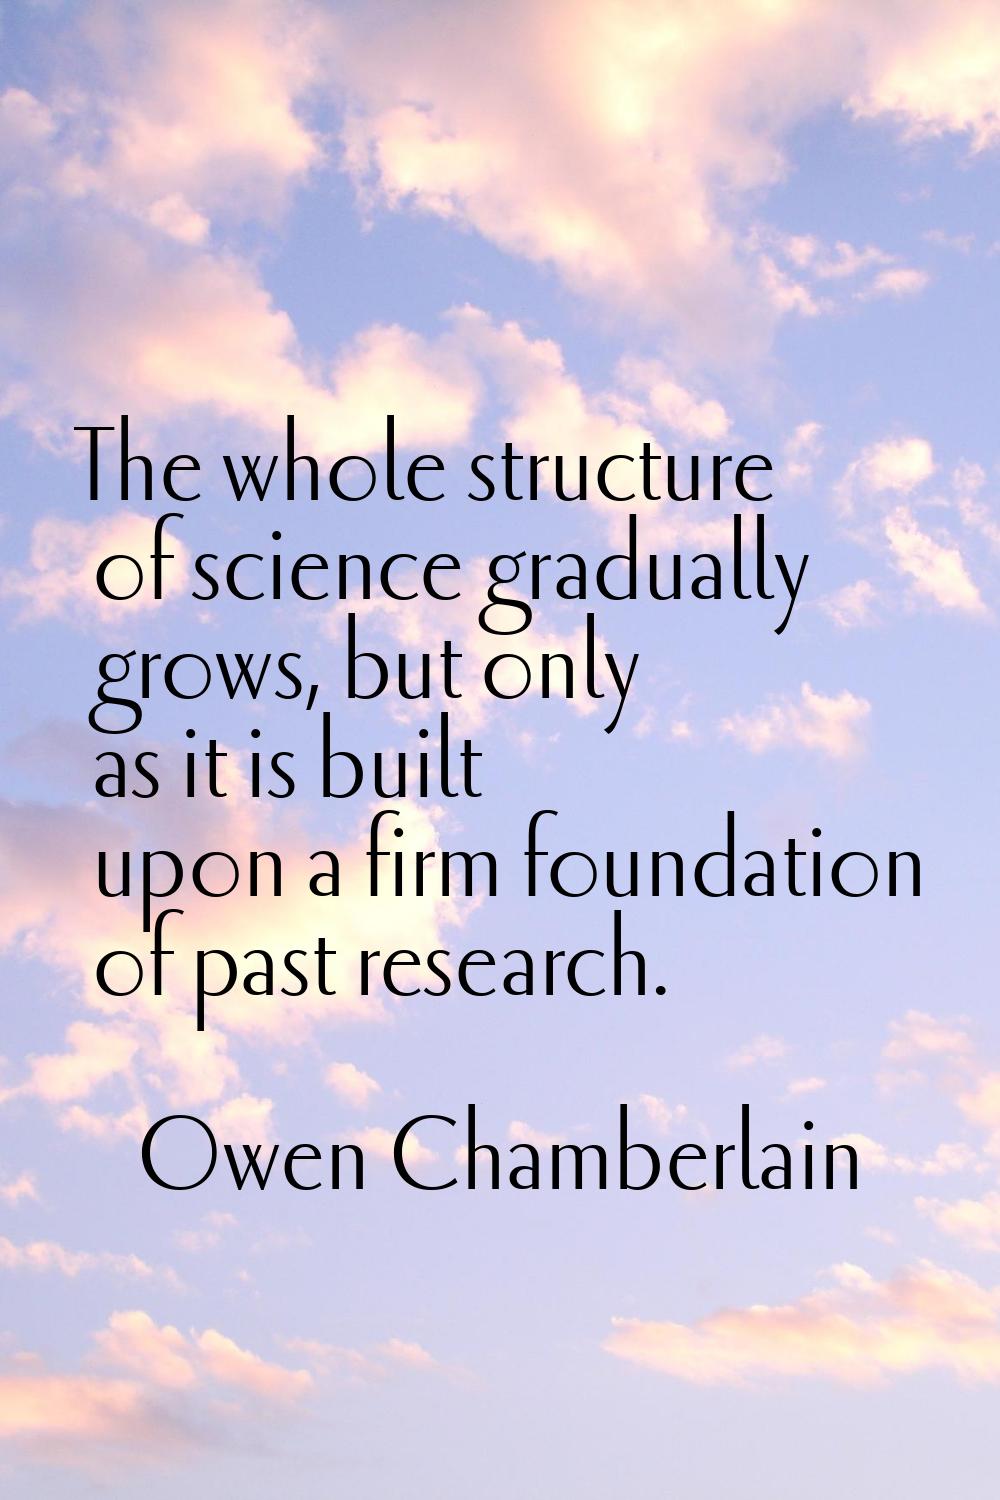 The whole structure of science gradually grows, but only as it is built upon a firm foundation of p